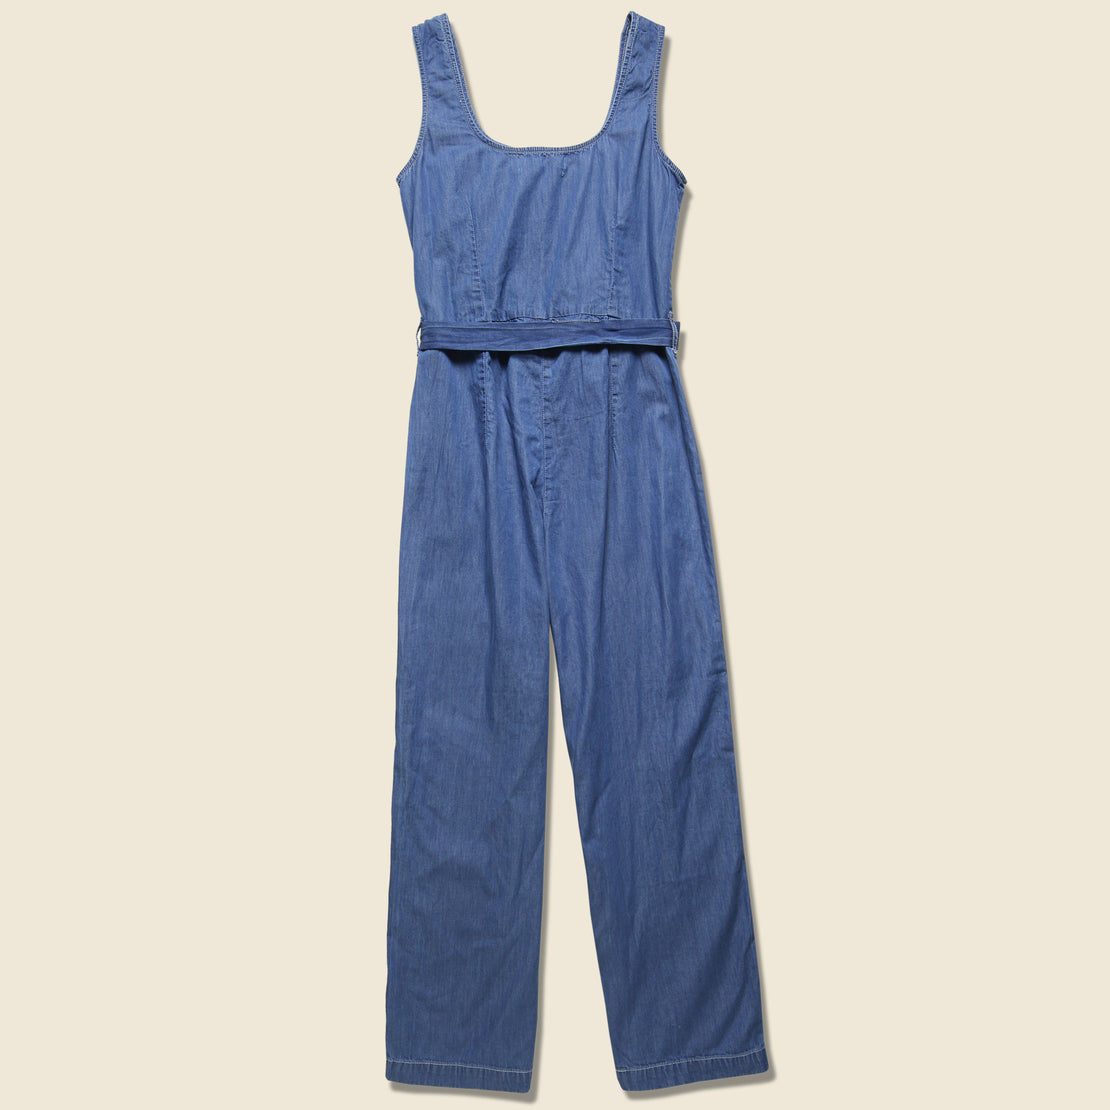 Denim Jumpsuit - Blue - Nice Things - STAG Provisions - W - Onepiece - Jumpsuit